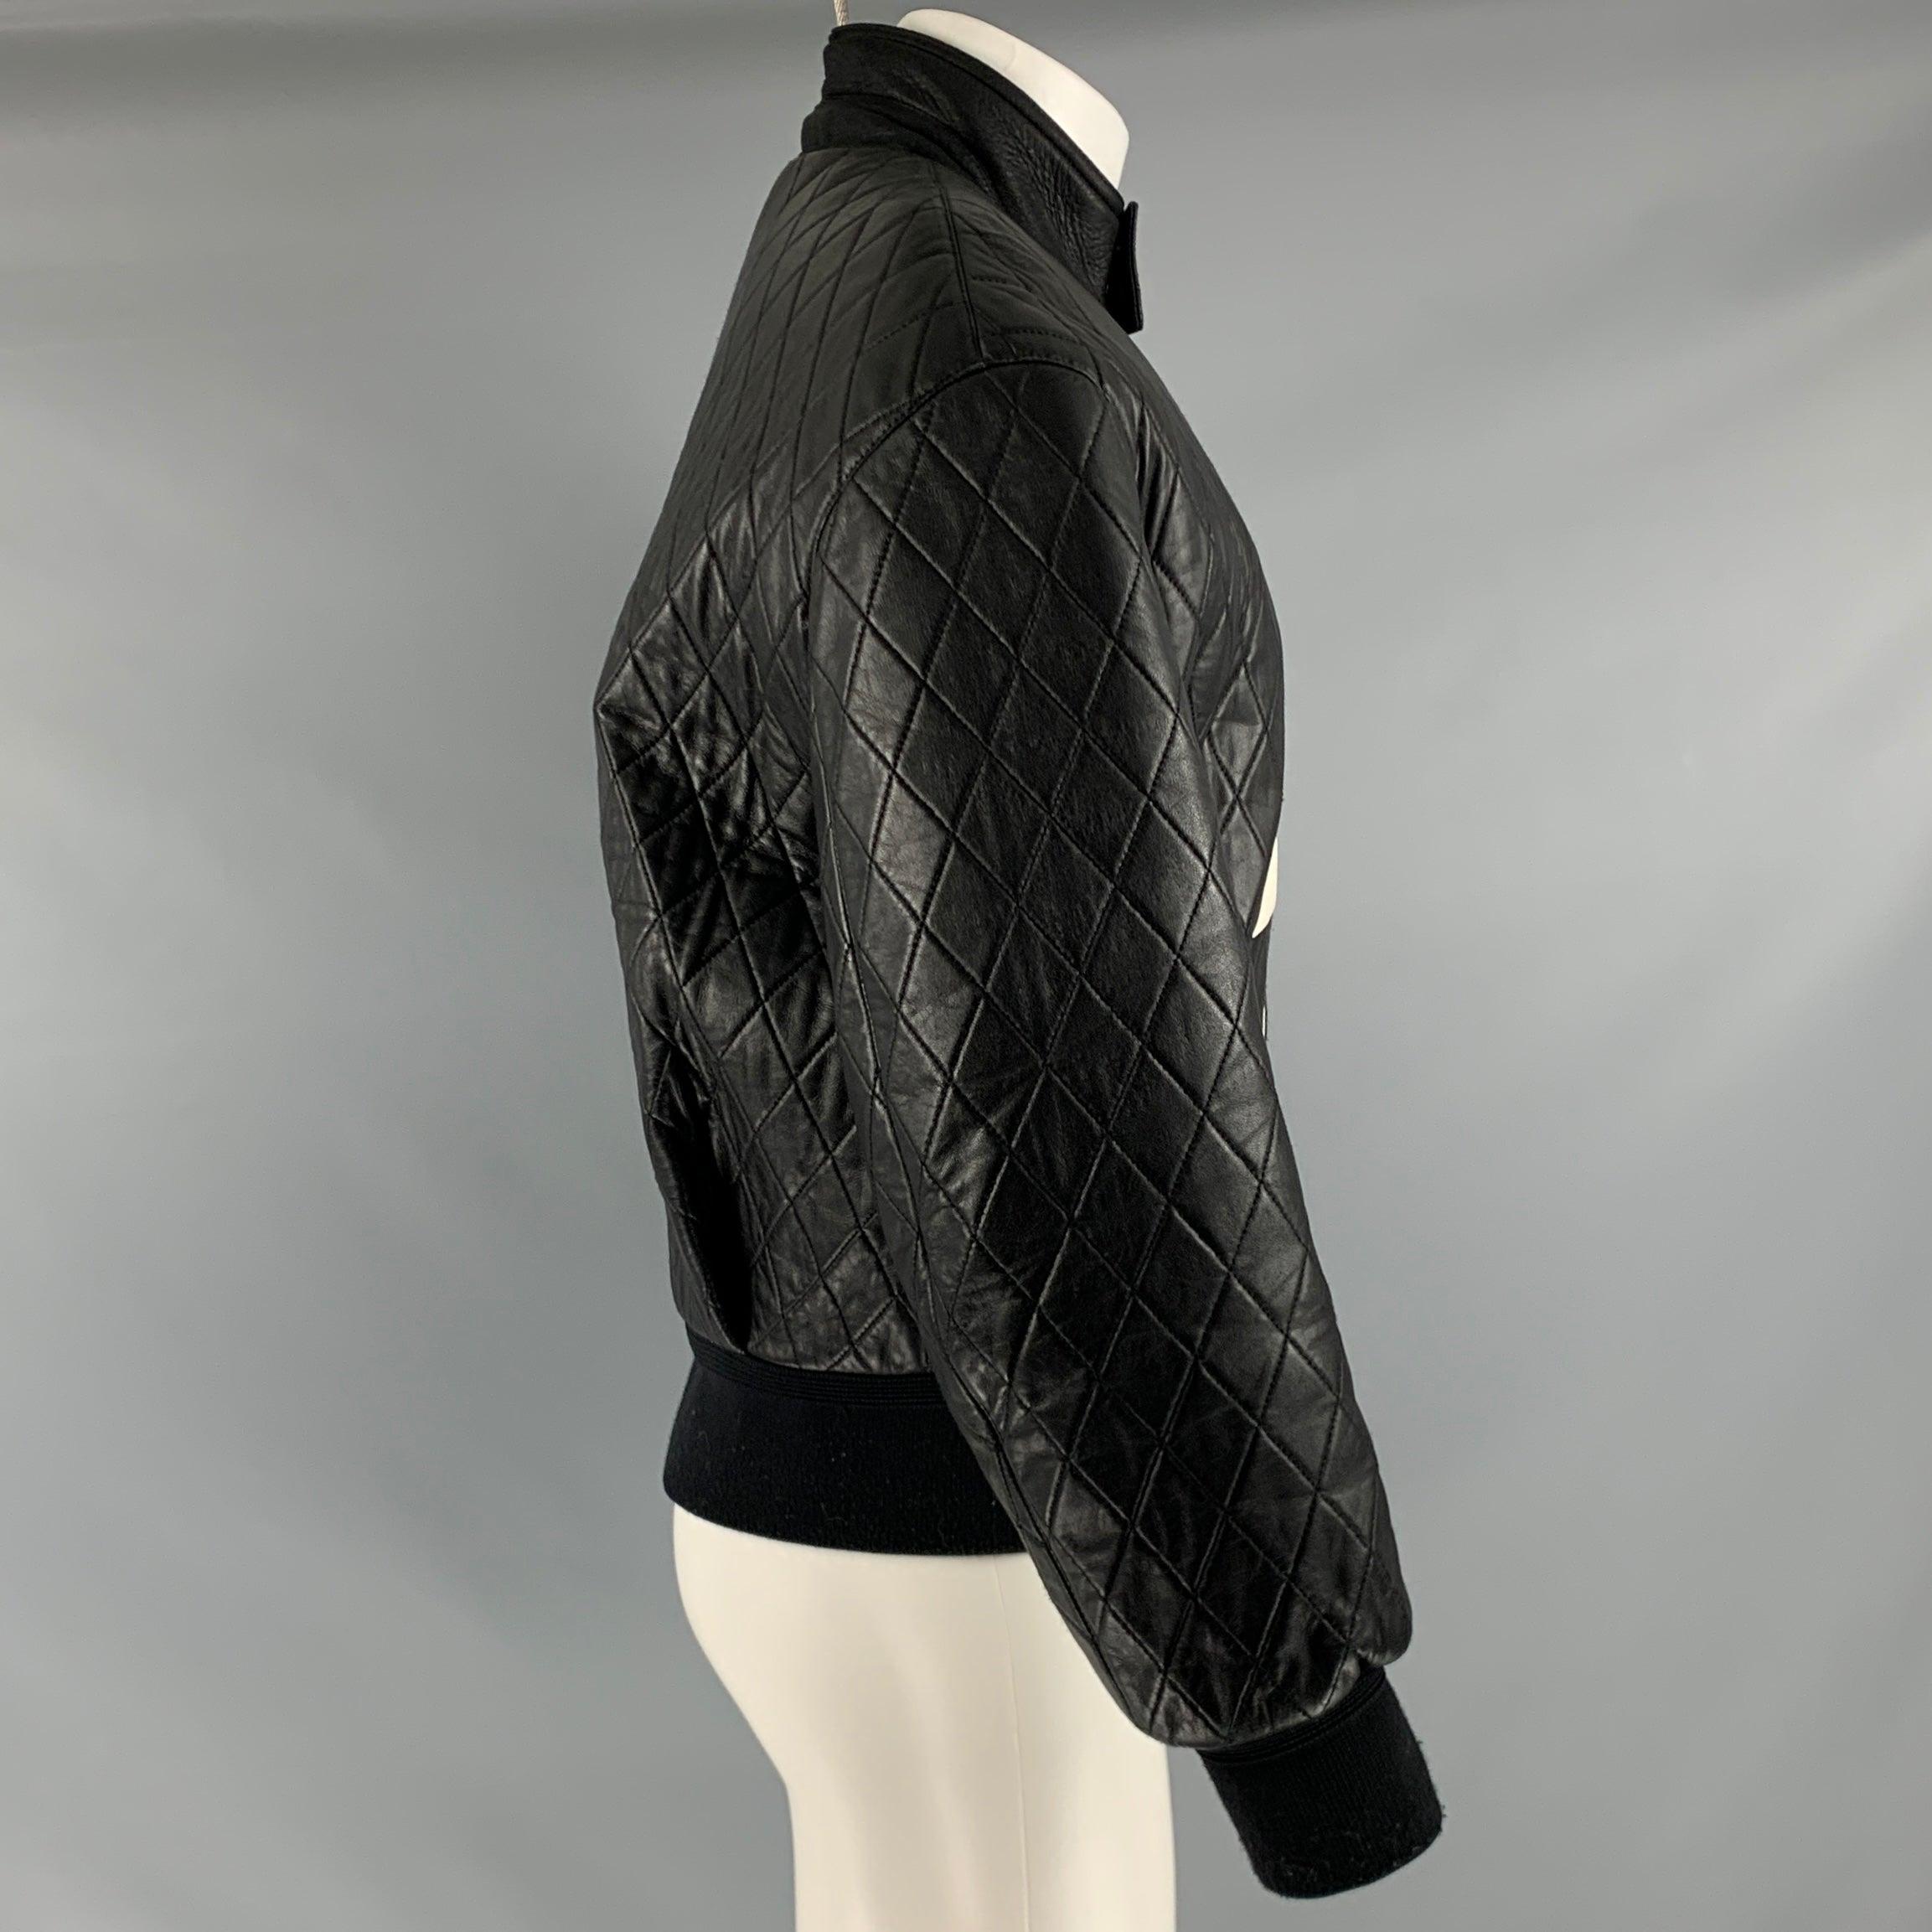 NEIL BARRETT jacket
in a black and white leather fabric featuring a quilted style, oversized bomber fit, lightning bolt design, and zip up closure. Made in Italy.Very Good Pre-Owned Condition. Minor signs of wear. 

Marked:   S 

Measurements: 
